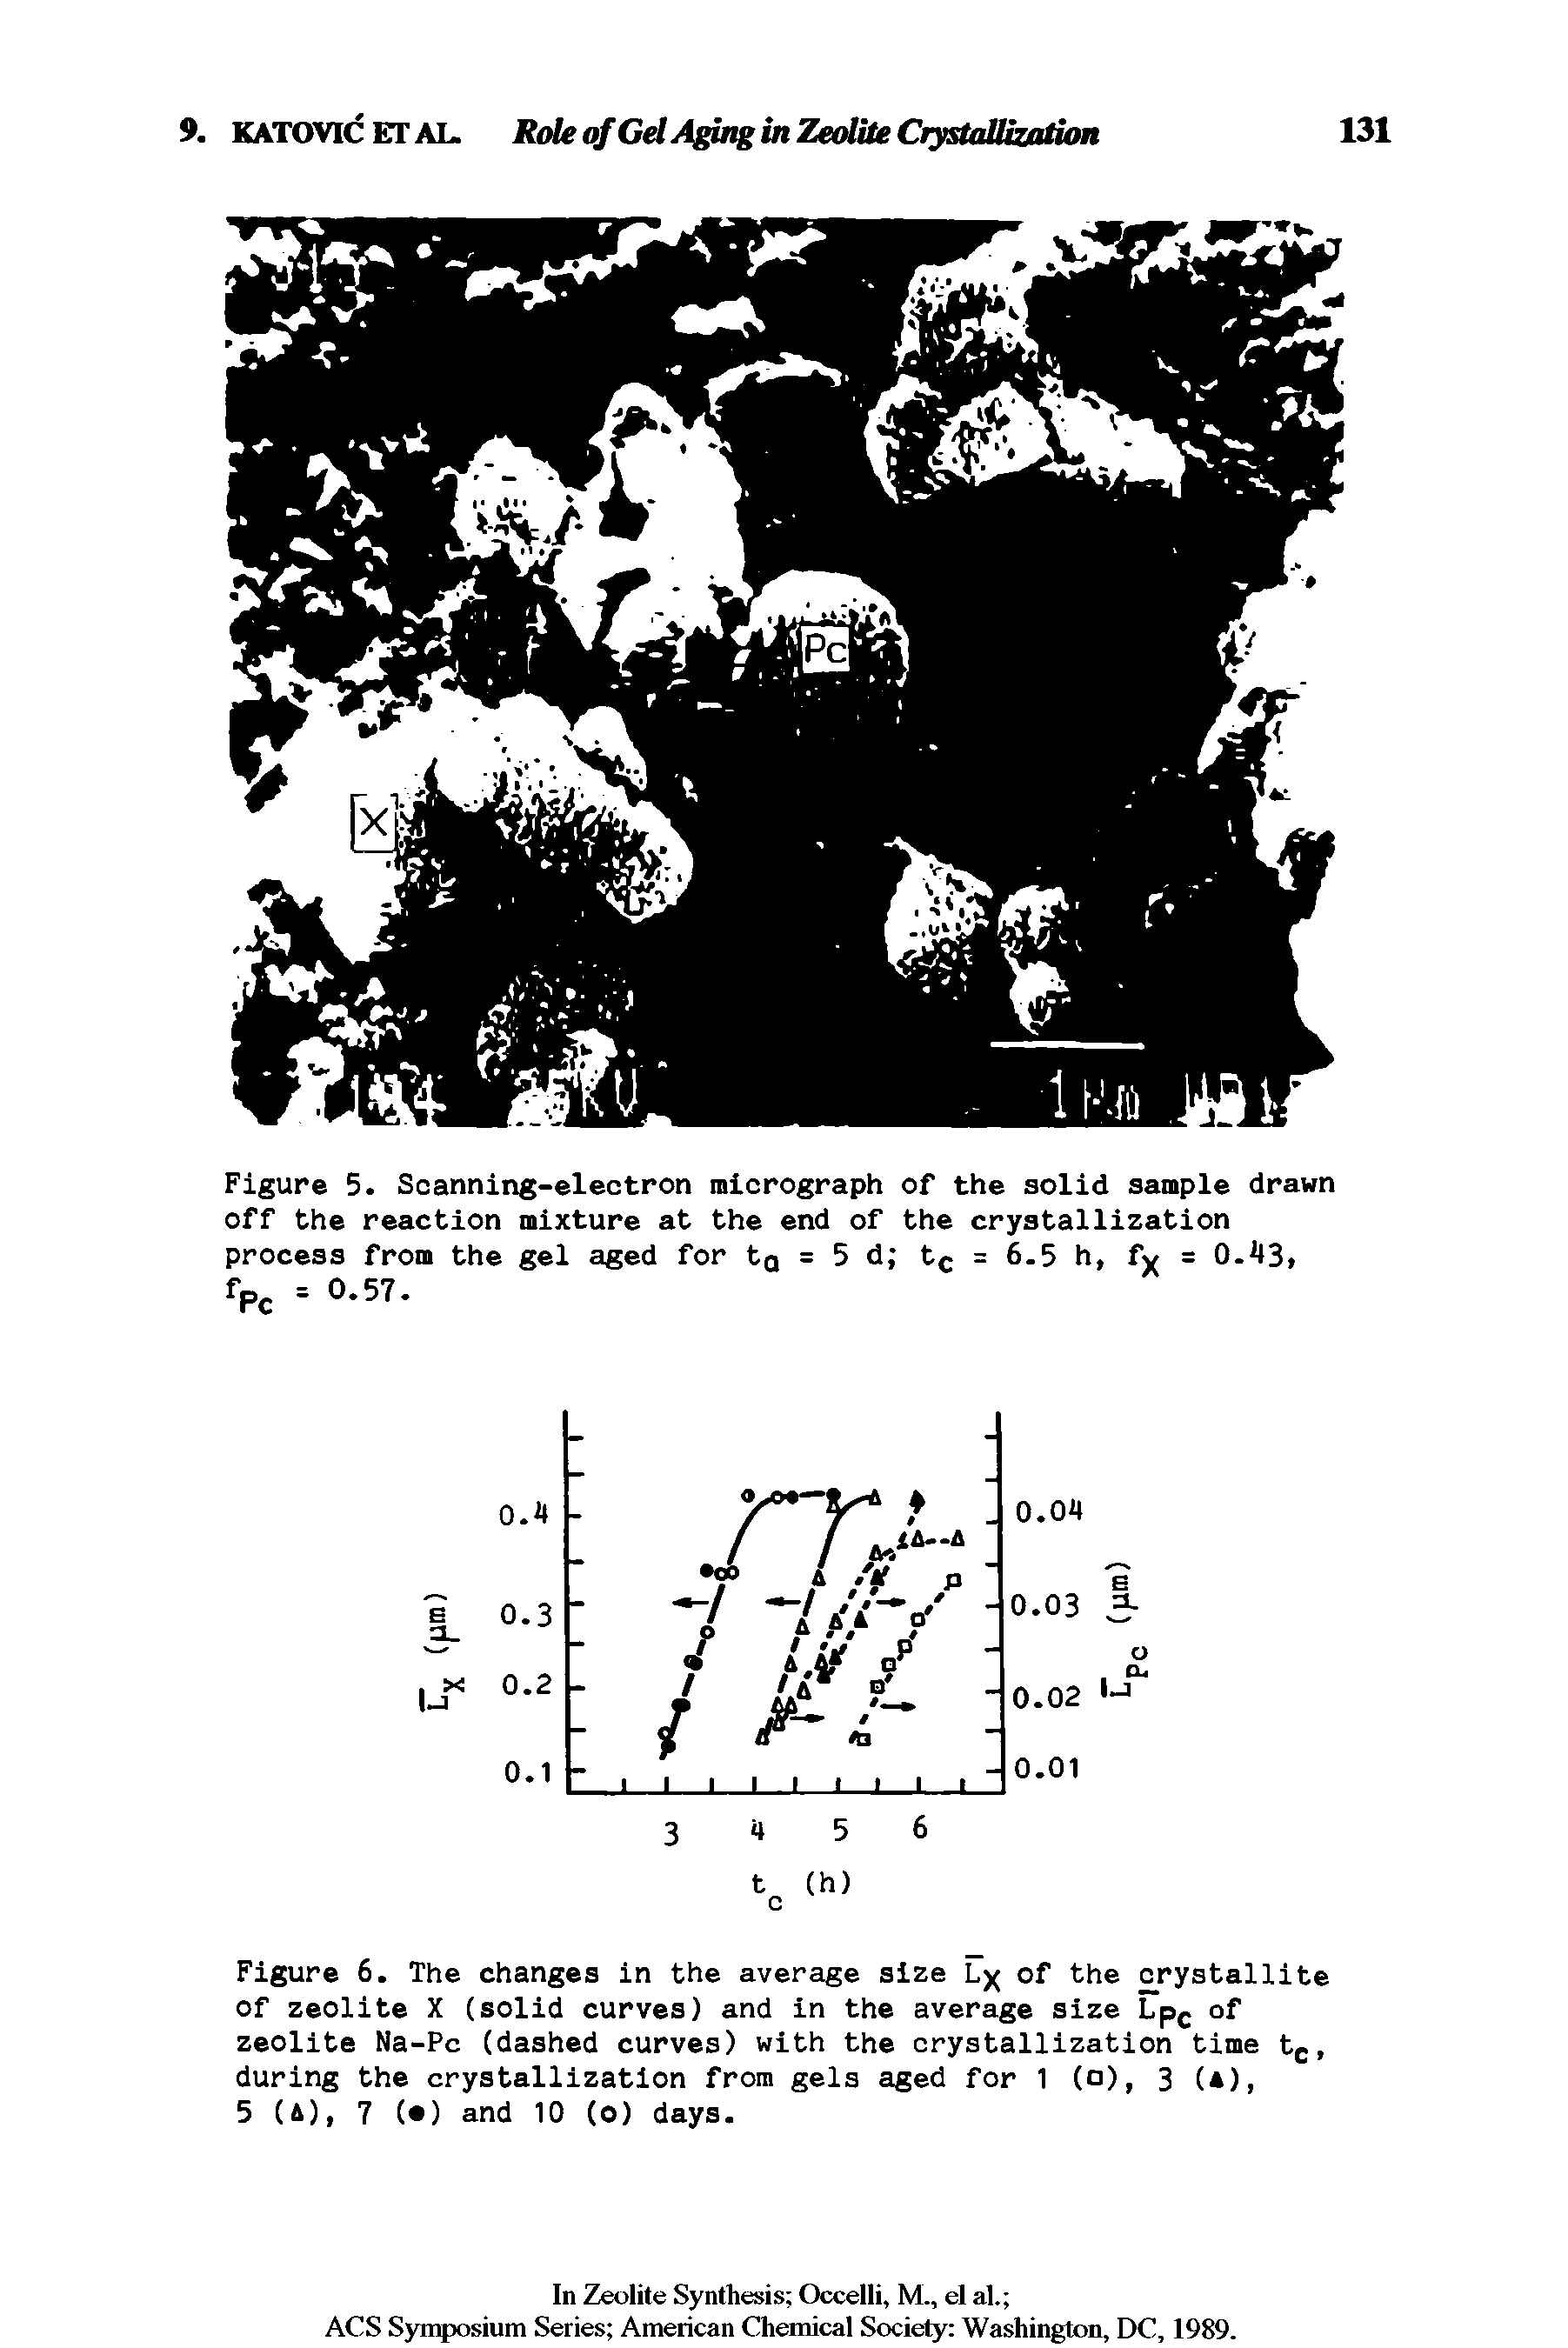 Figure 5. Scanning-electron micrograph of the solid sample drawn off the reaction mixture at the end of the crystallization process from the gel aged for tQ = 5 d tc = 6.5 h, fy = O- B,...